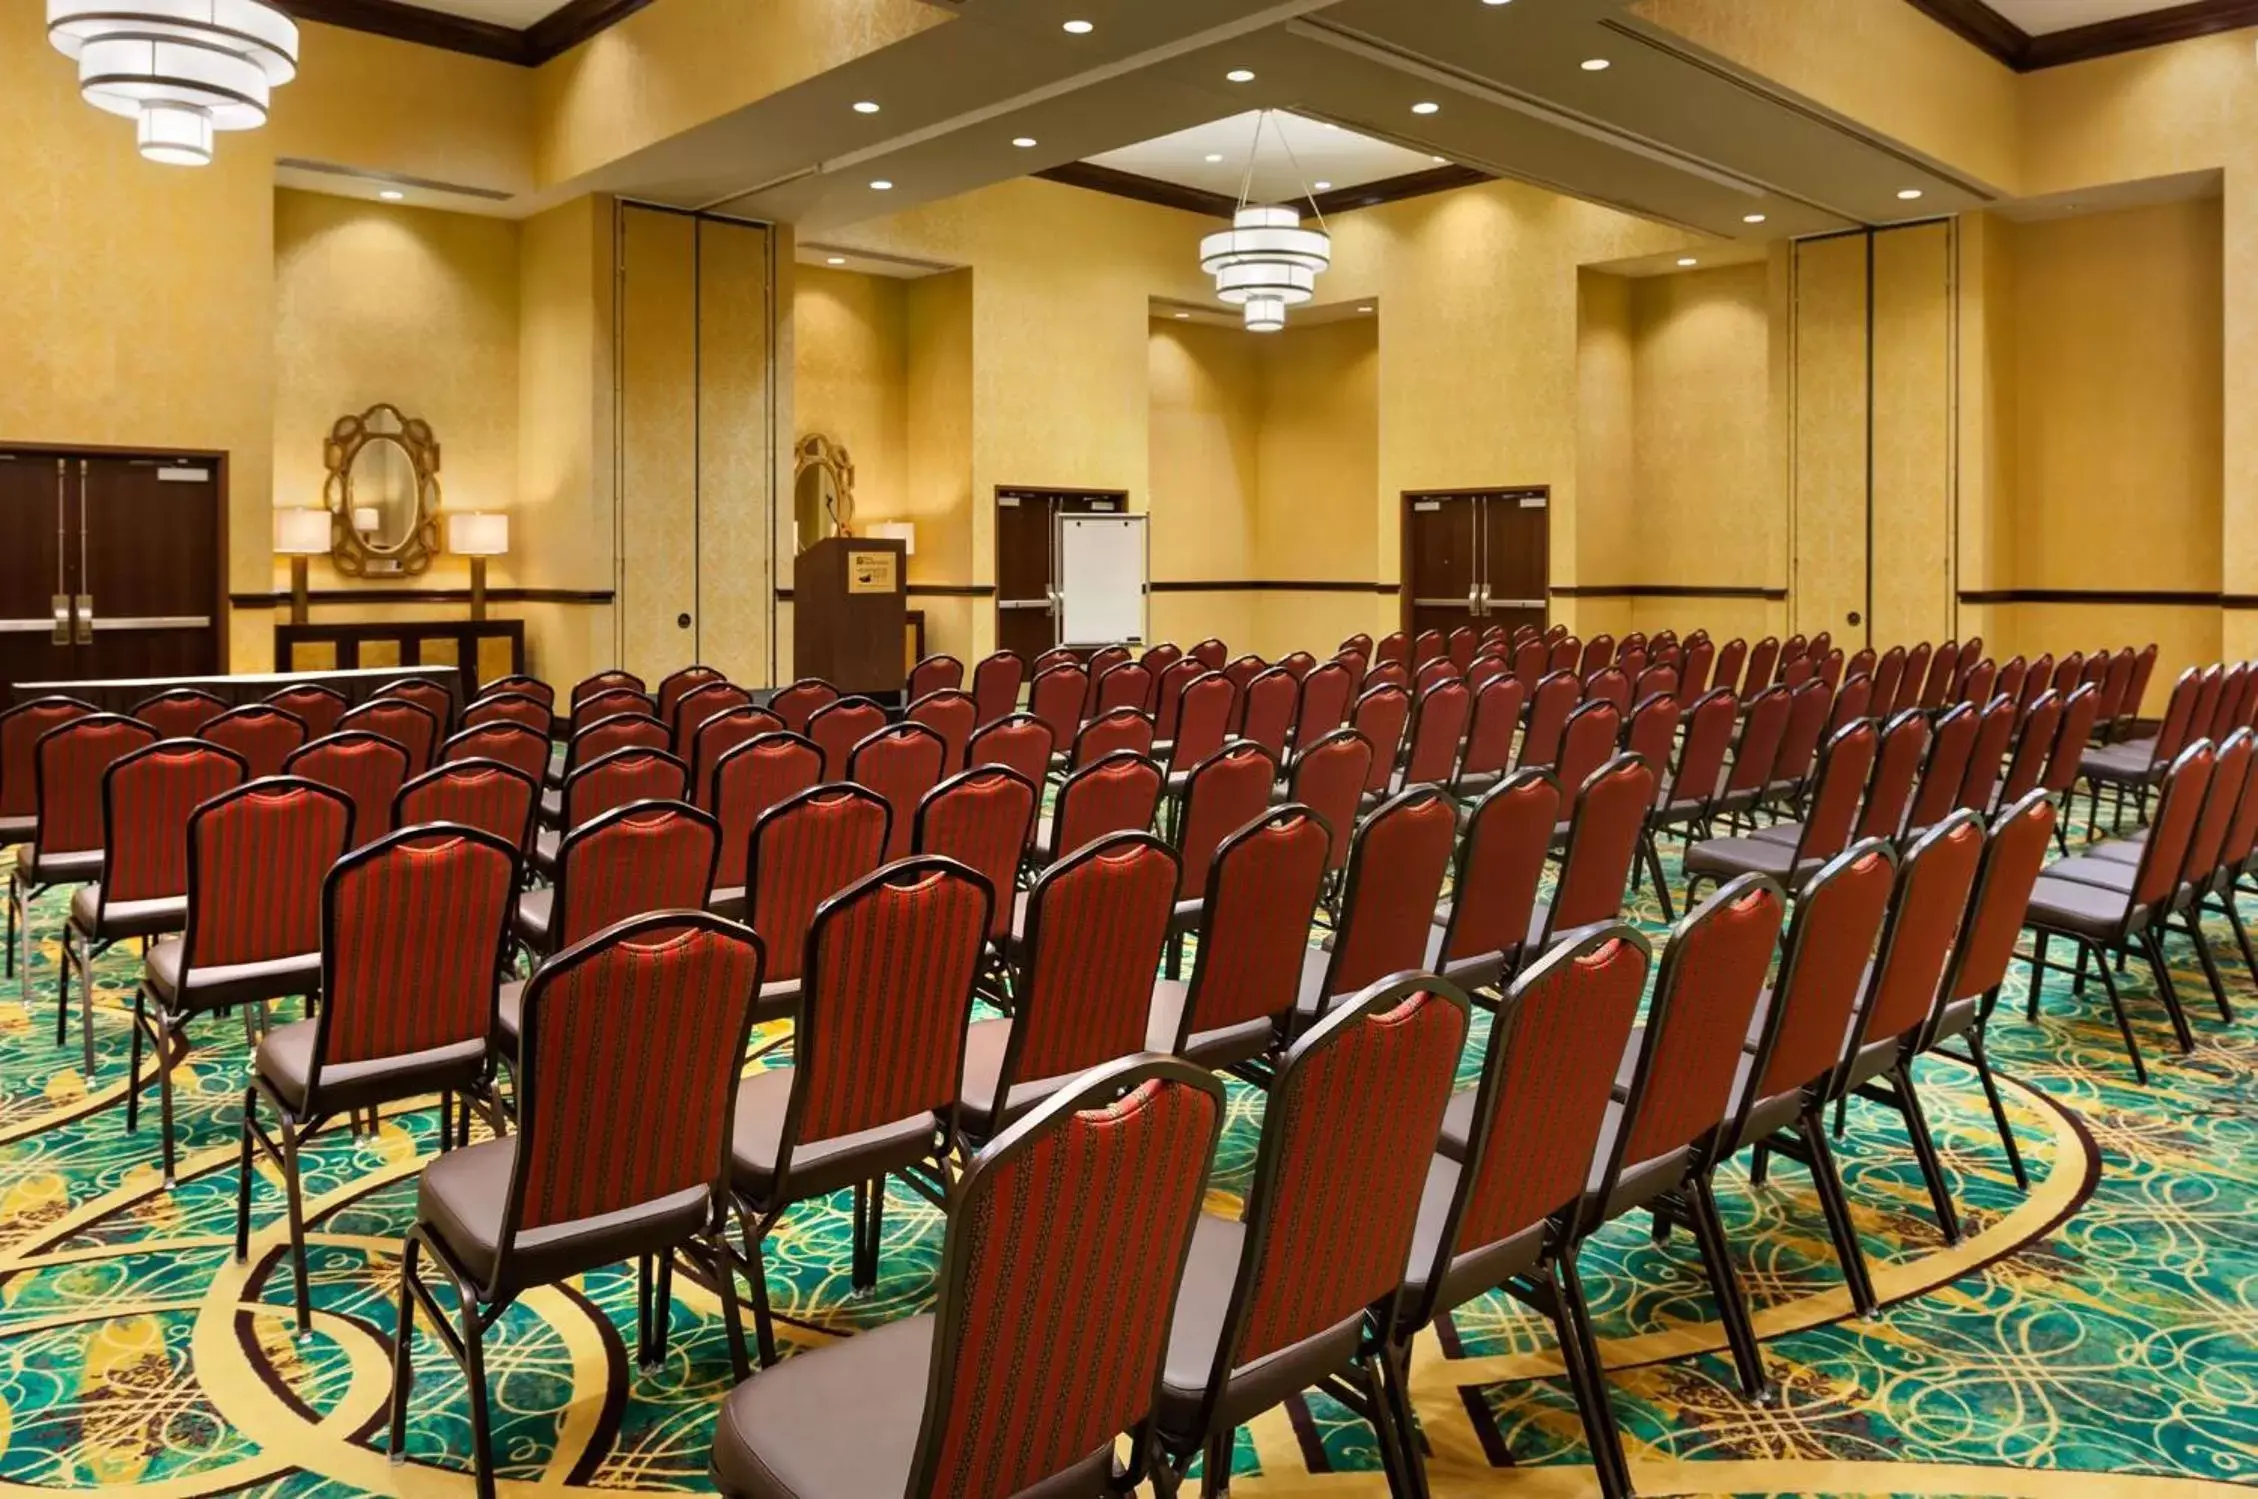 Meeting/conference room in Homewood Suites by Hilton Shreveport Bossier City, LA